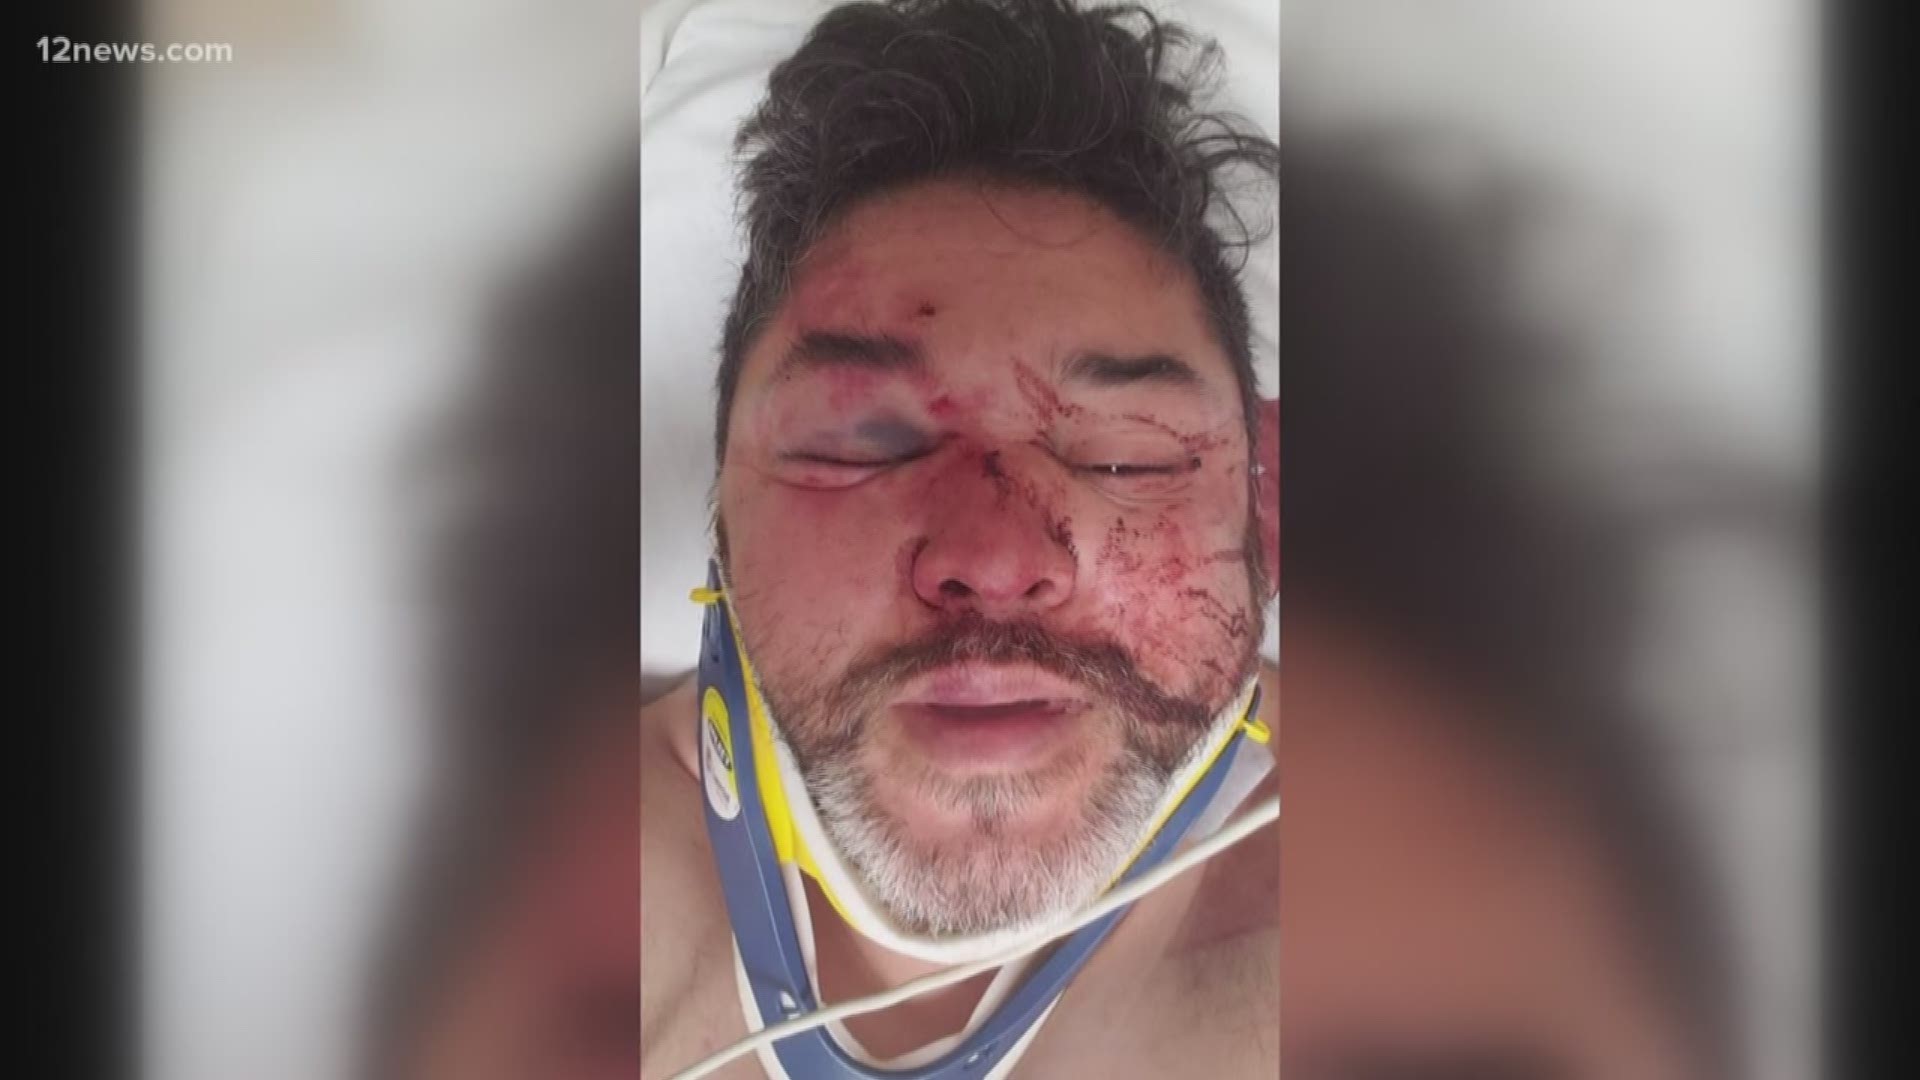 A Phoenix man said he was bashed because he's gay and then attacked by multiple people in downtown Phoenix. Police are investigating.